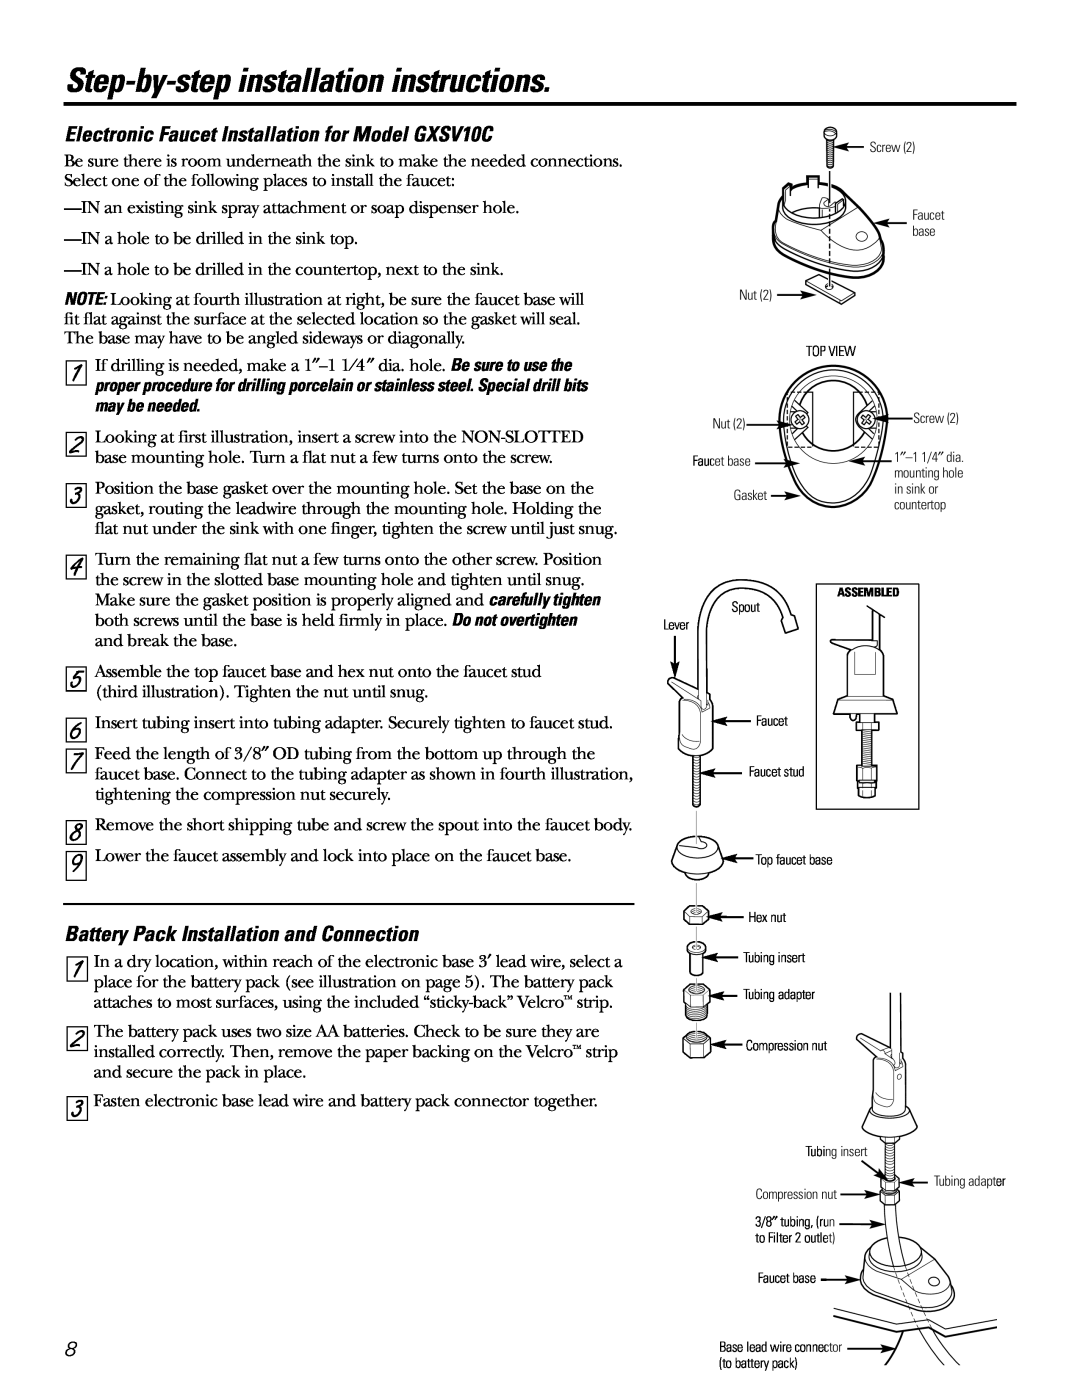 GE GXSL03C Electronic Faucet Installation for Model GXSV10C, Battery Pack Installation and Connection, Assembled 